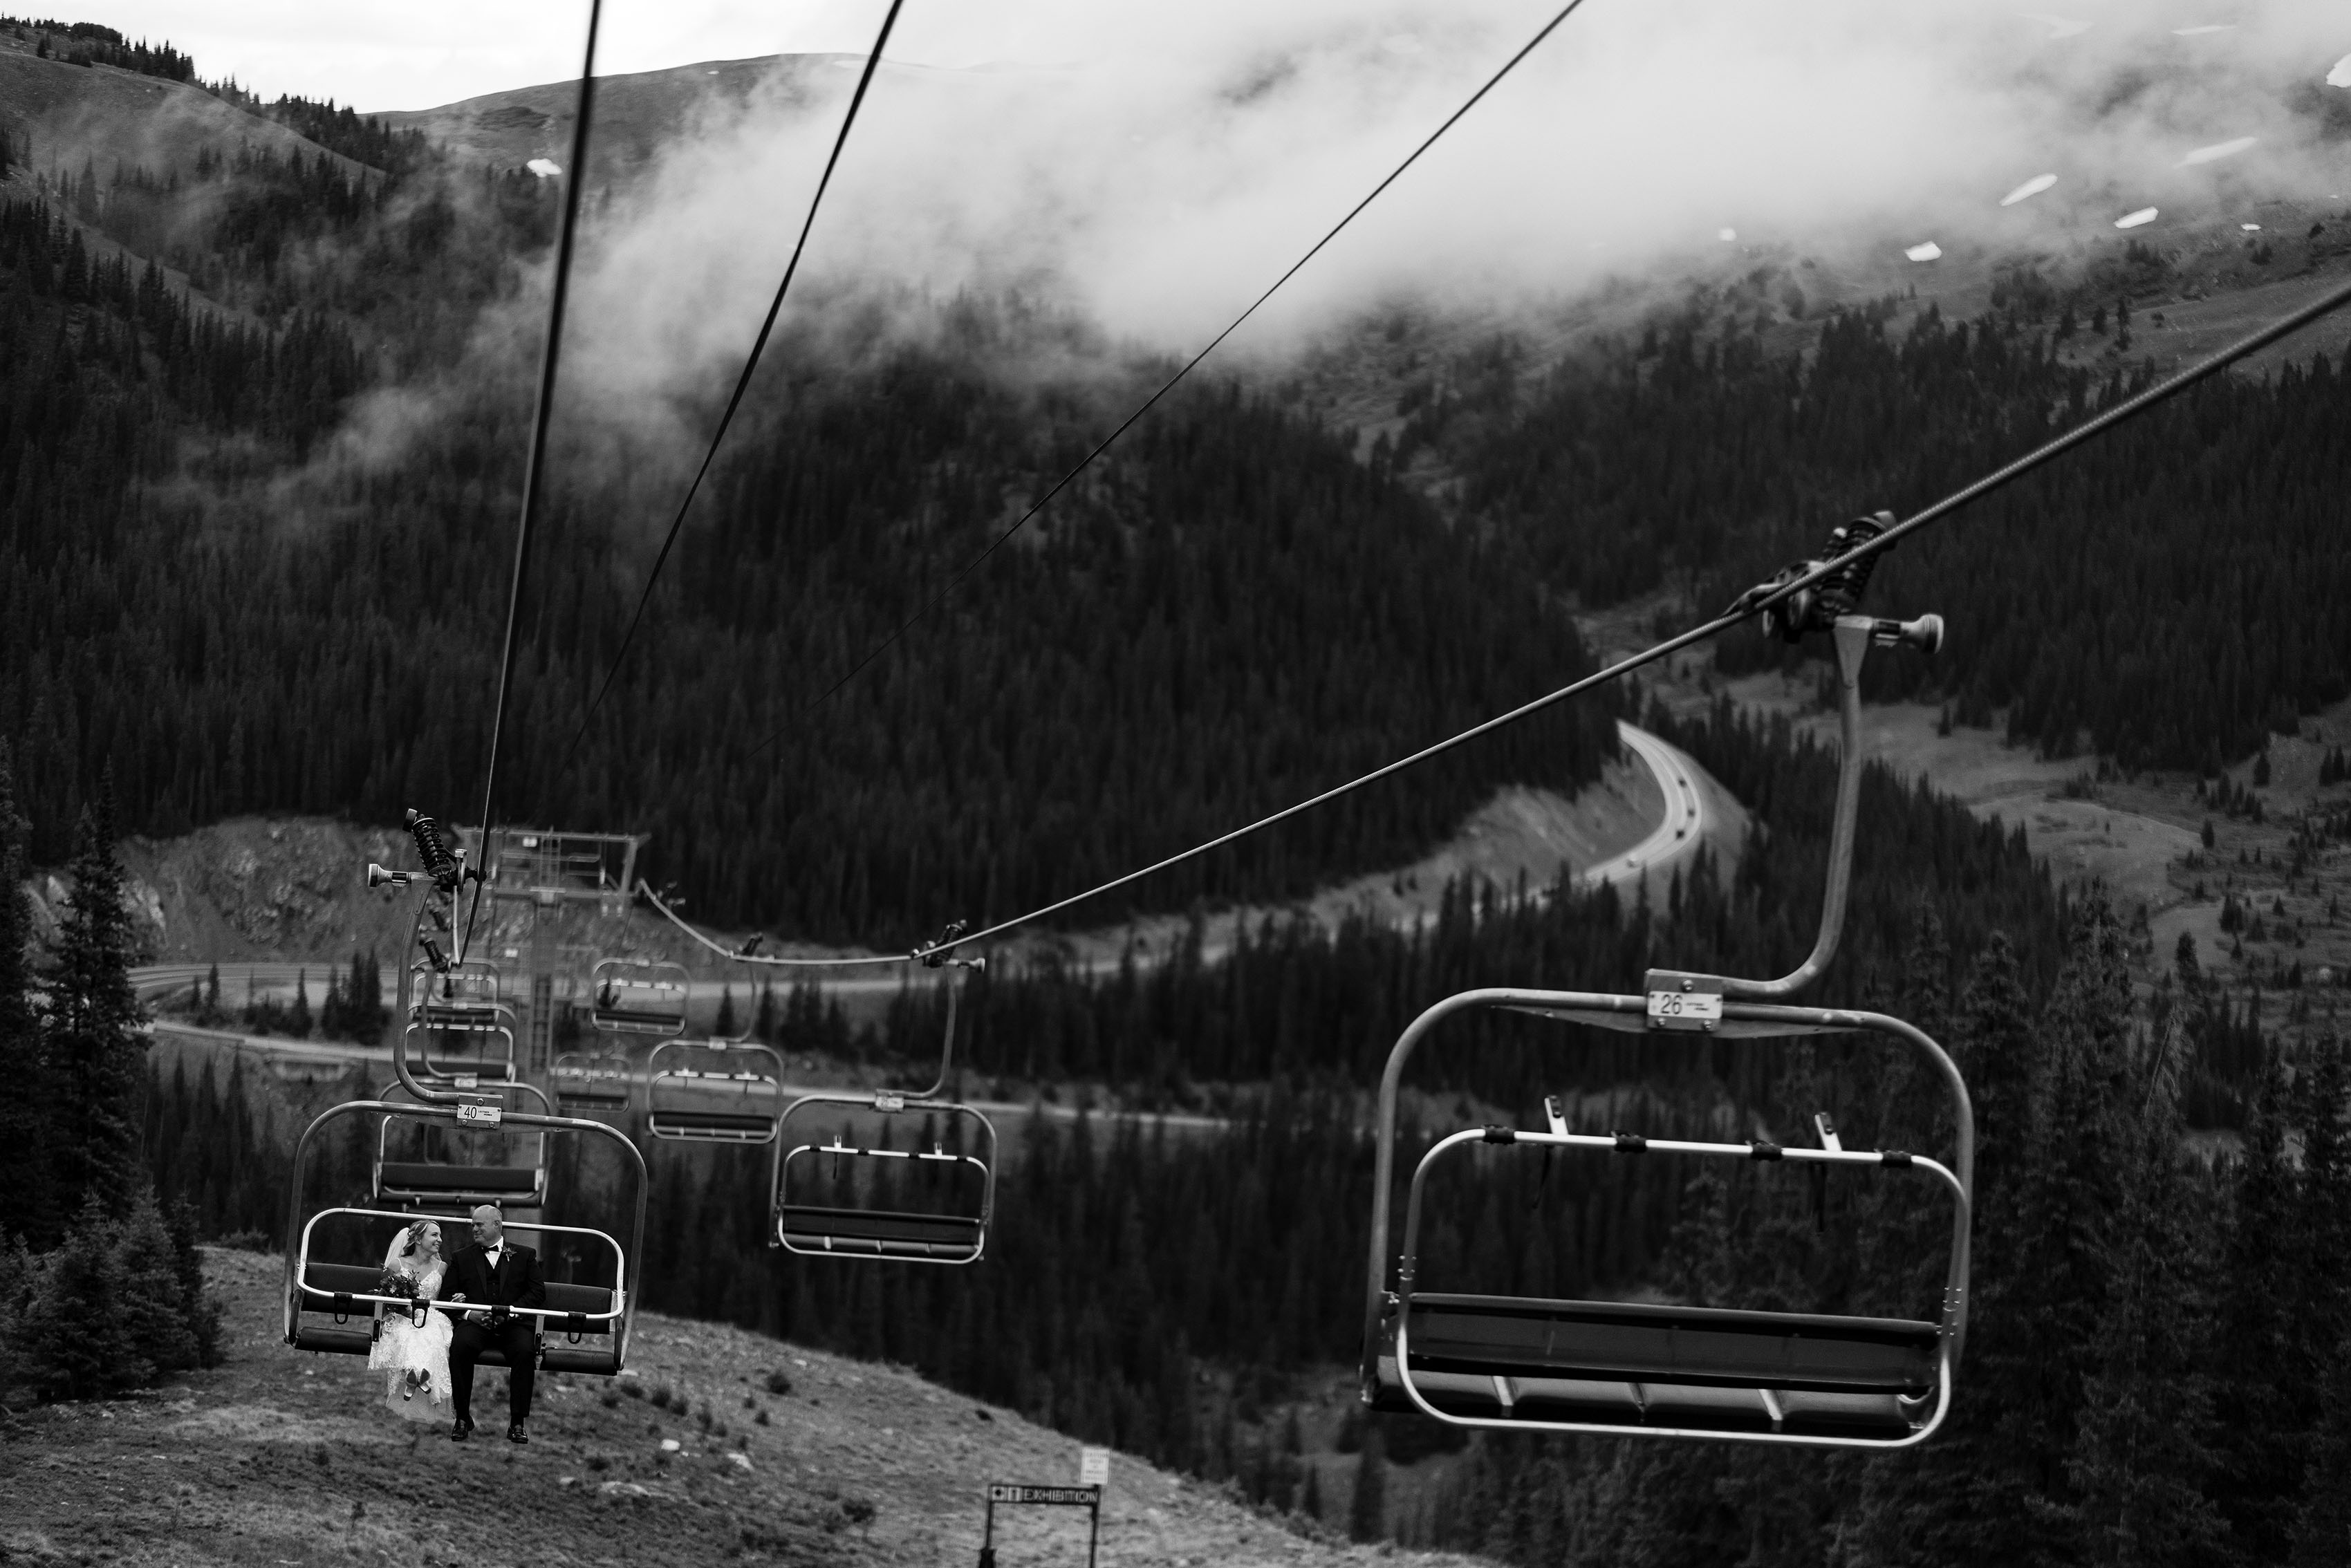 The bride rides the chairlift to the ceremony